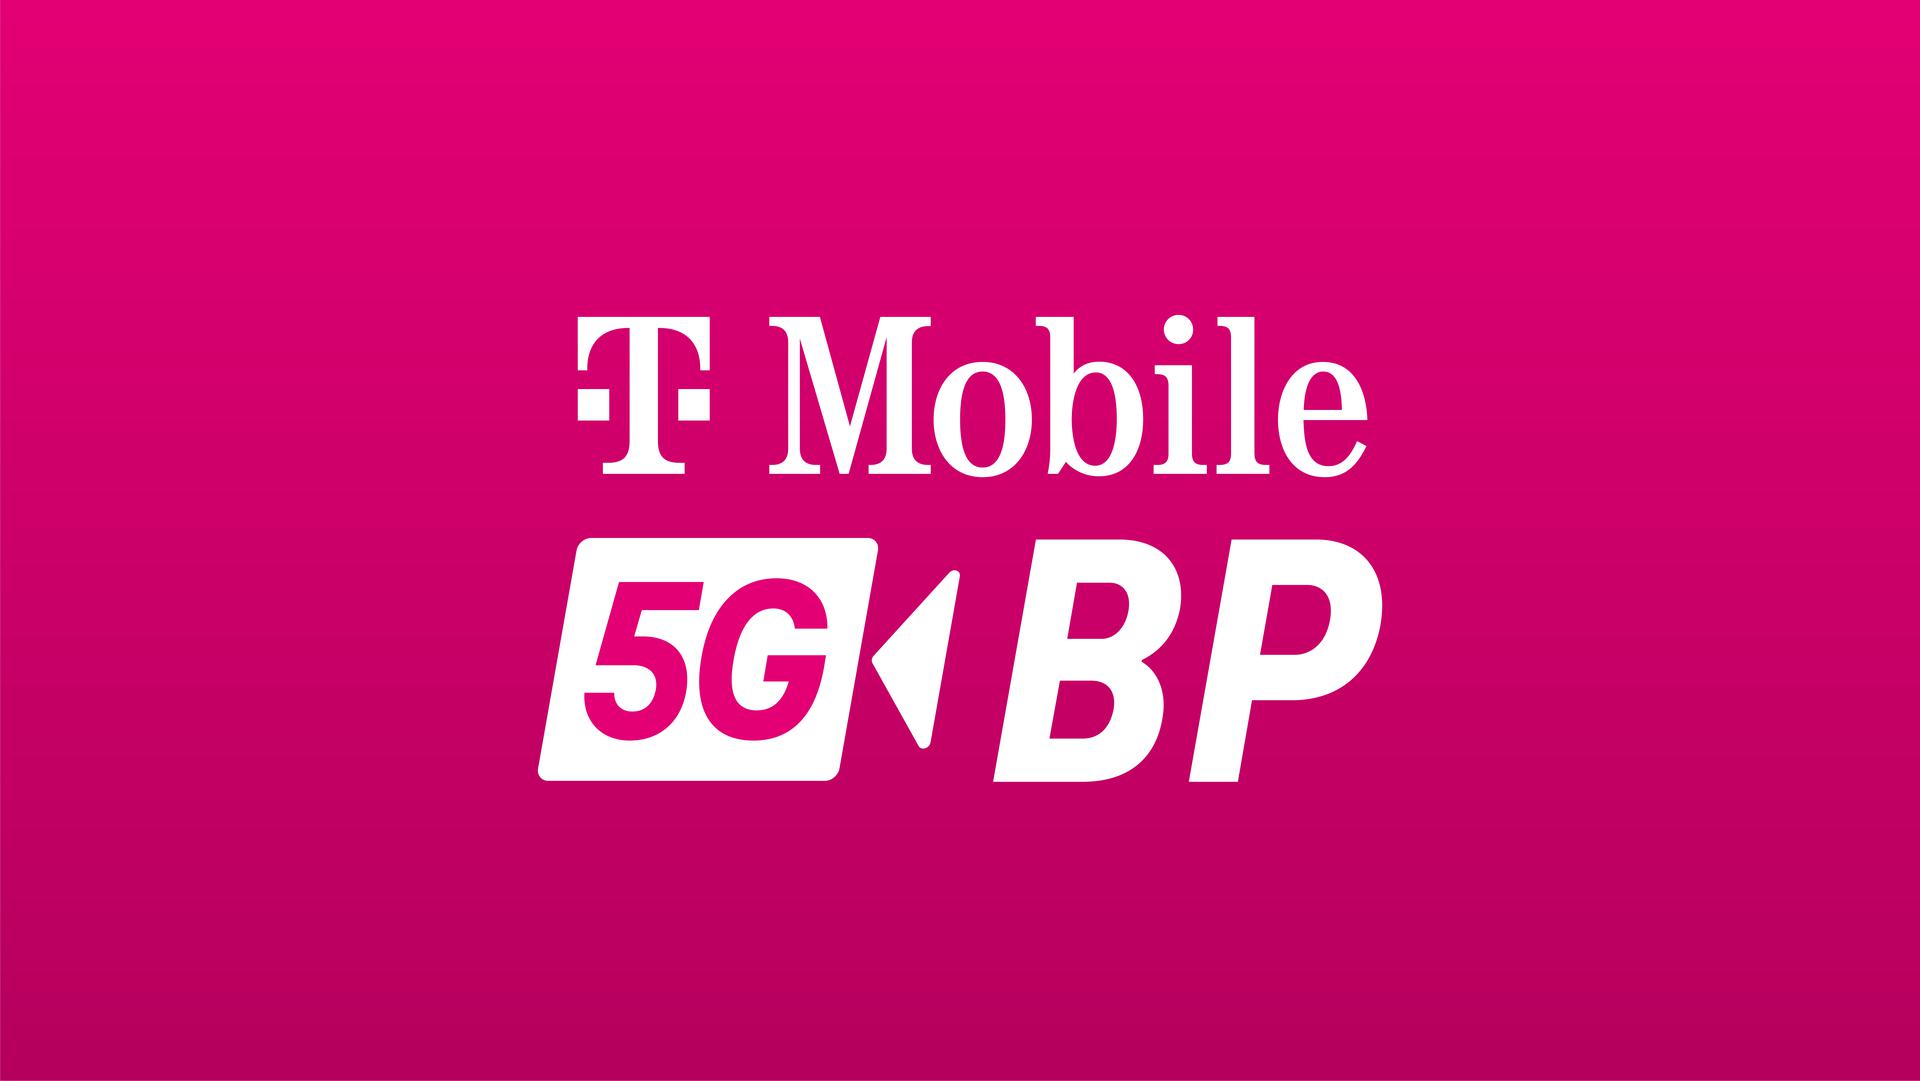 Text ''T-Mobile 5G BP'' on a pink background